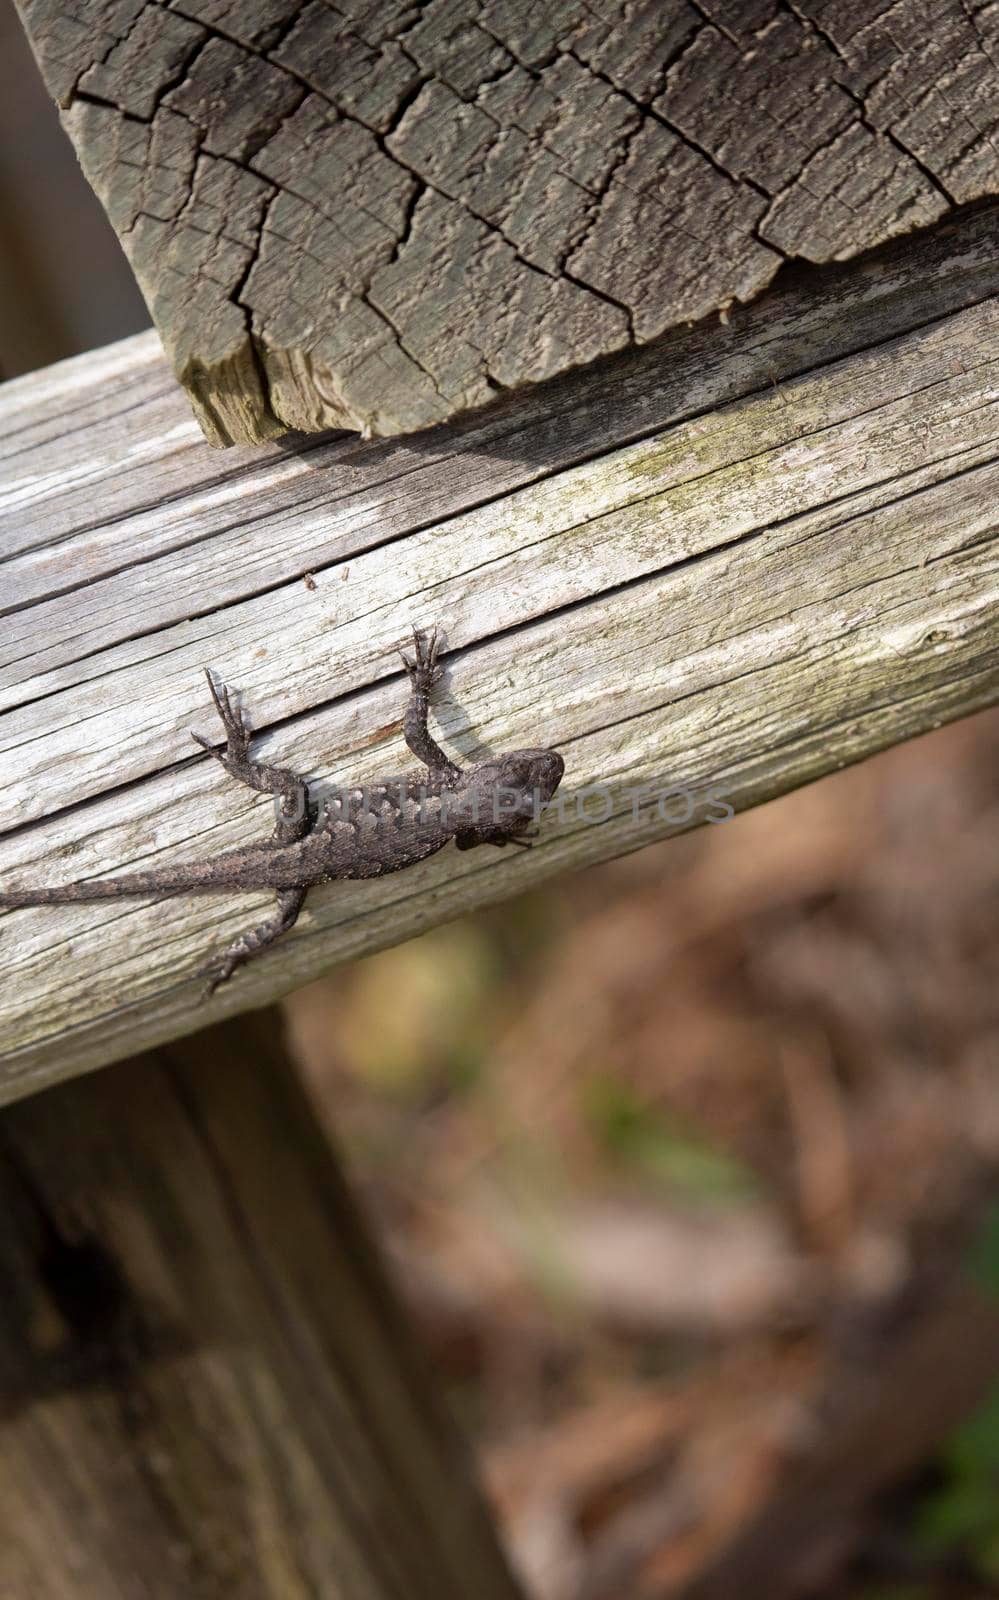 Female eastern fence lizard (Sceloporus consobrinus) on a wooden post